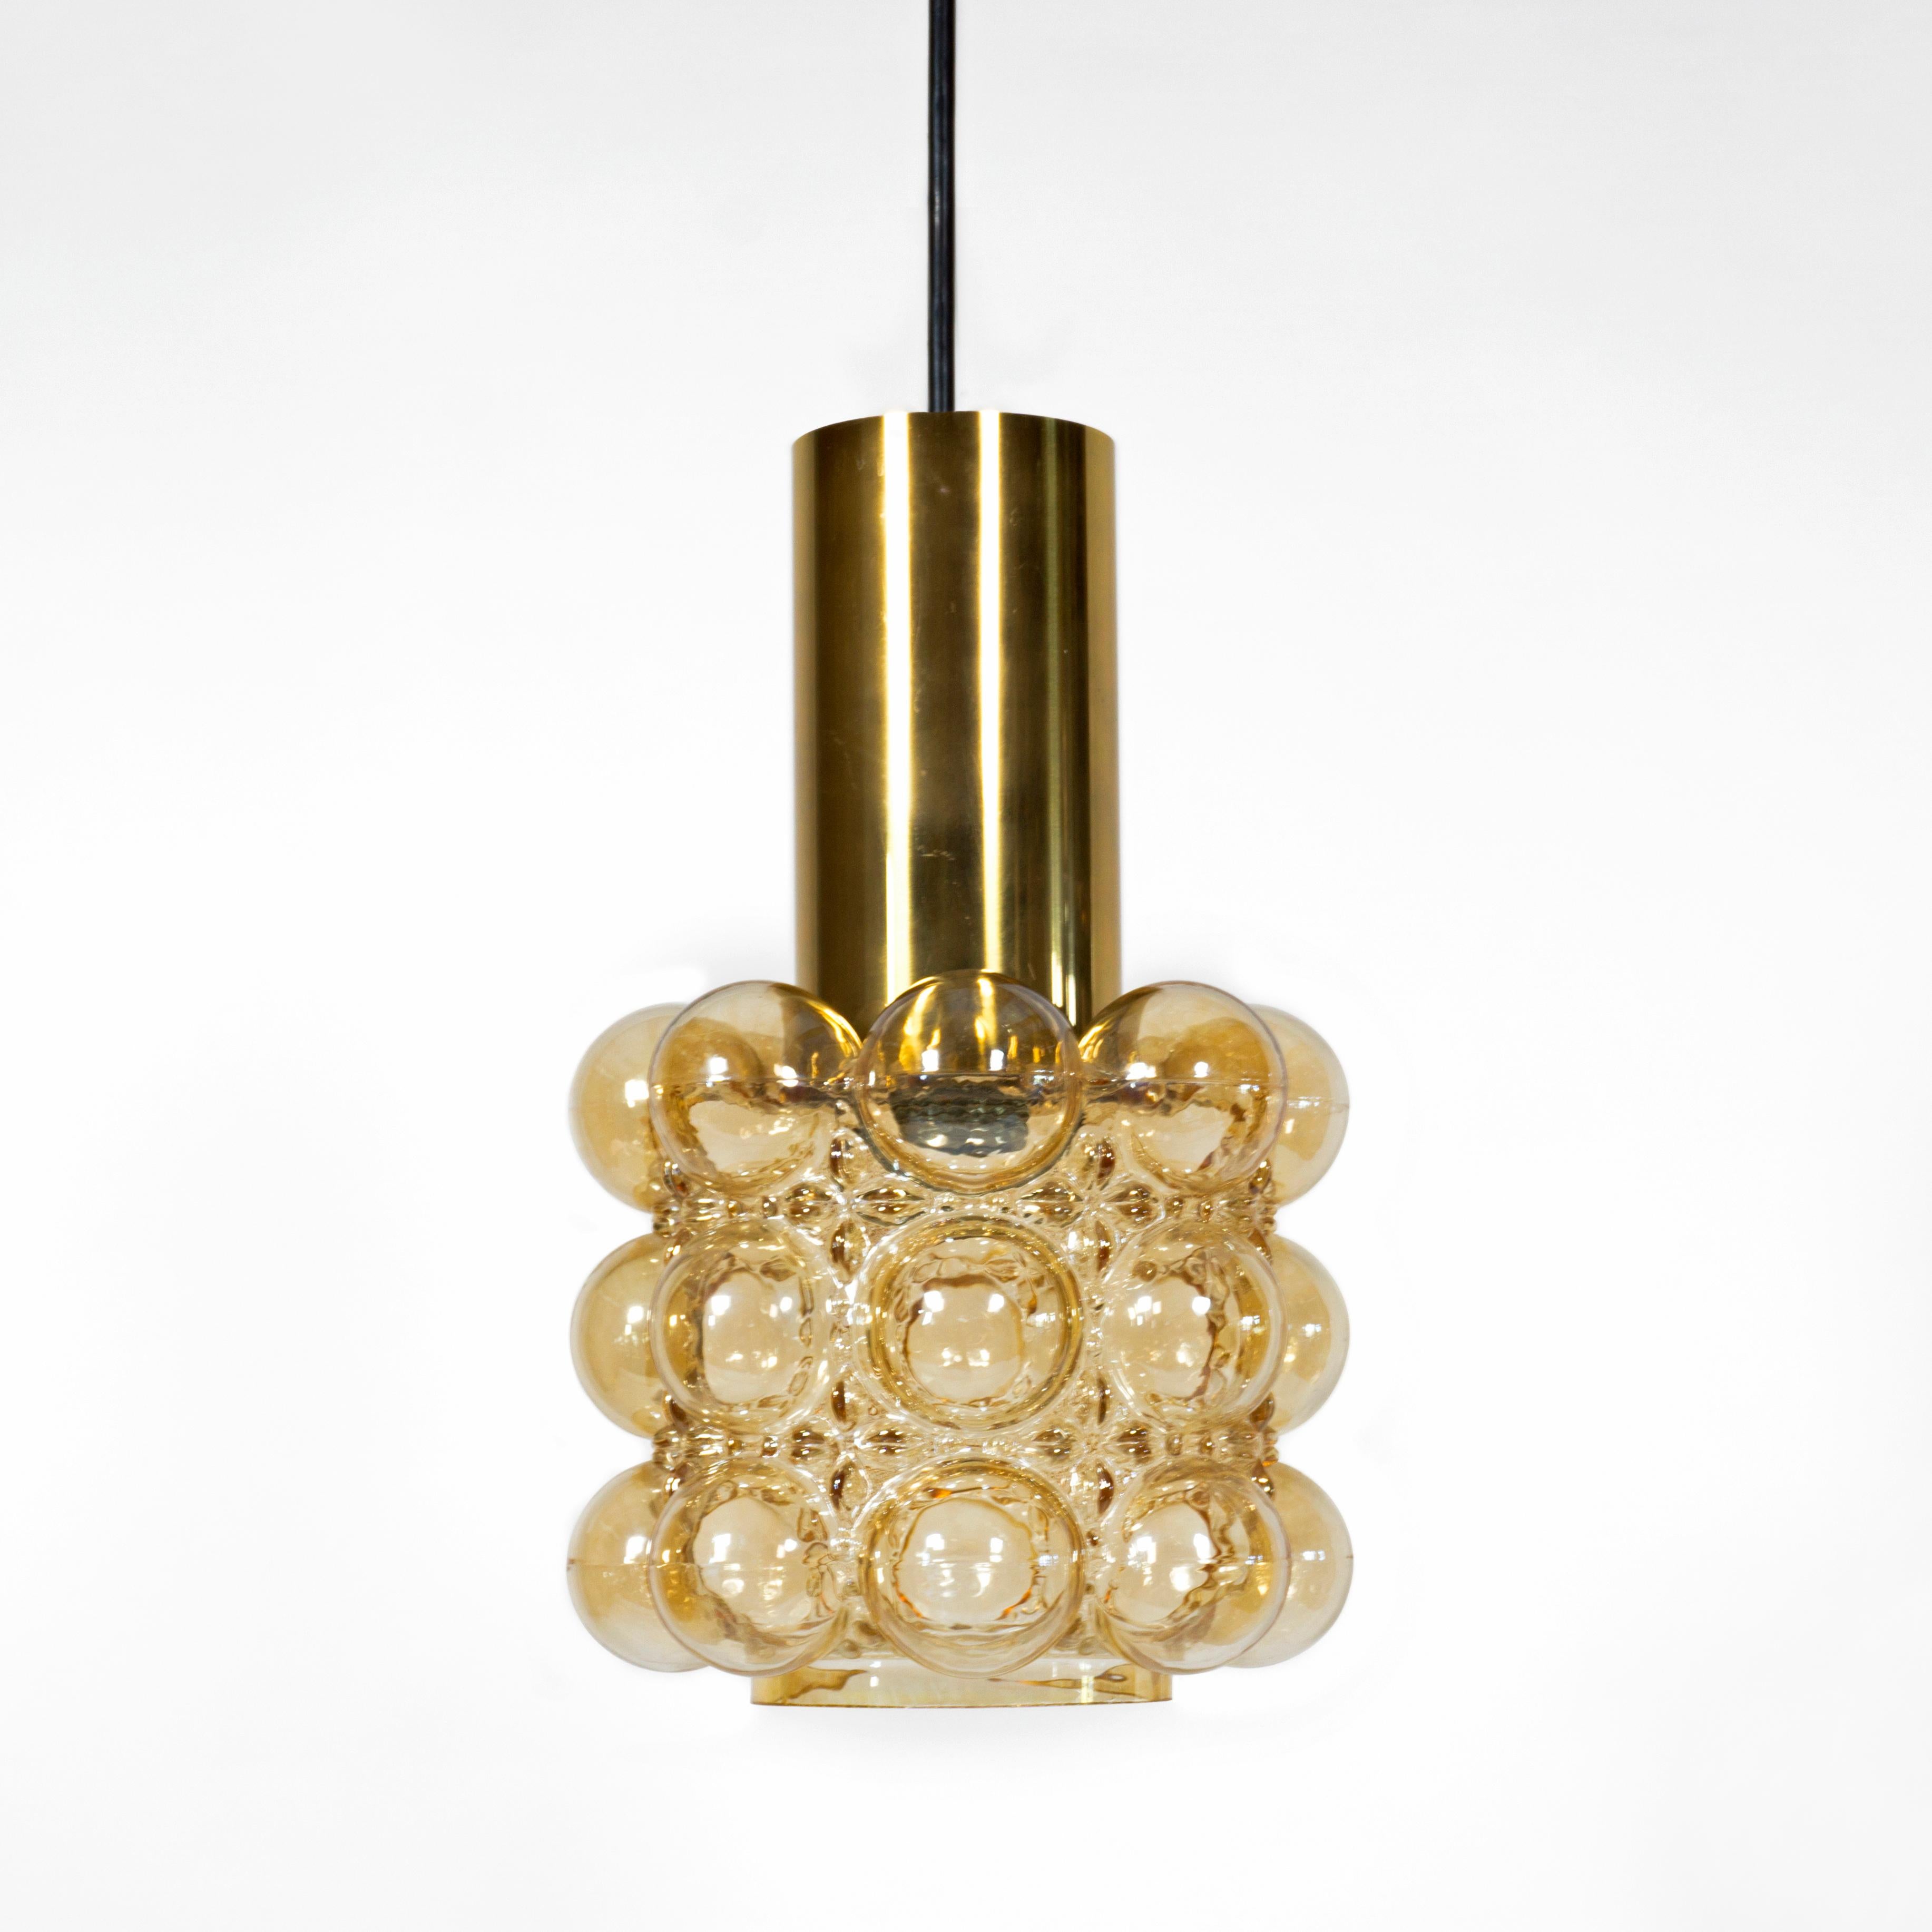 1 of 3 gorgeous vintage amber bubble glass pendant lights by Helena Tynell for Glashütte Limburg from the 1960s.
Thick, amber colored glass with a large brass tube. E27 socket.  
The lamp impresses with its great shape and the bubble amber glass